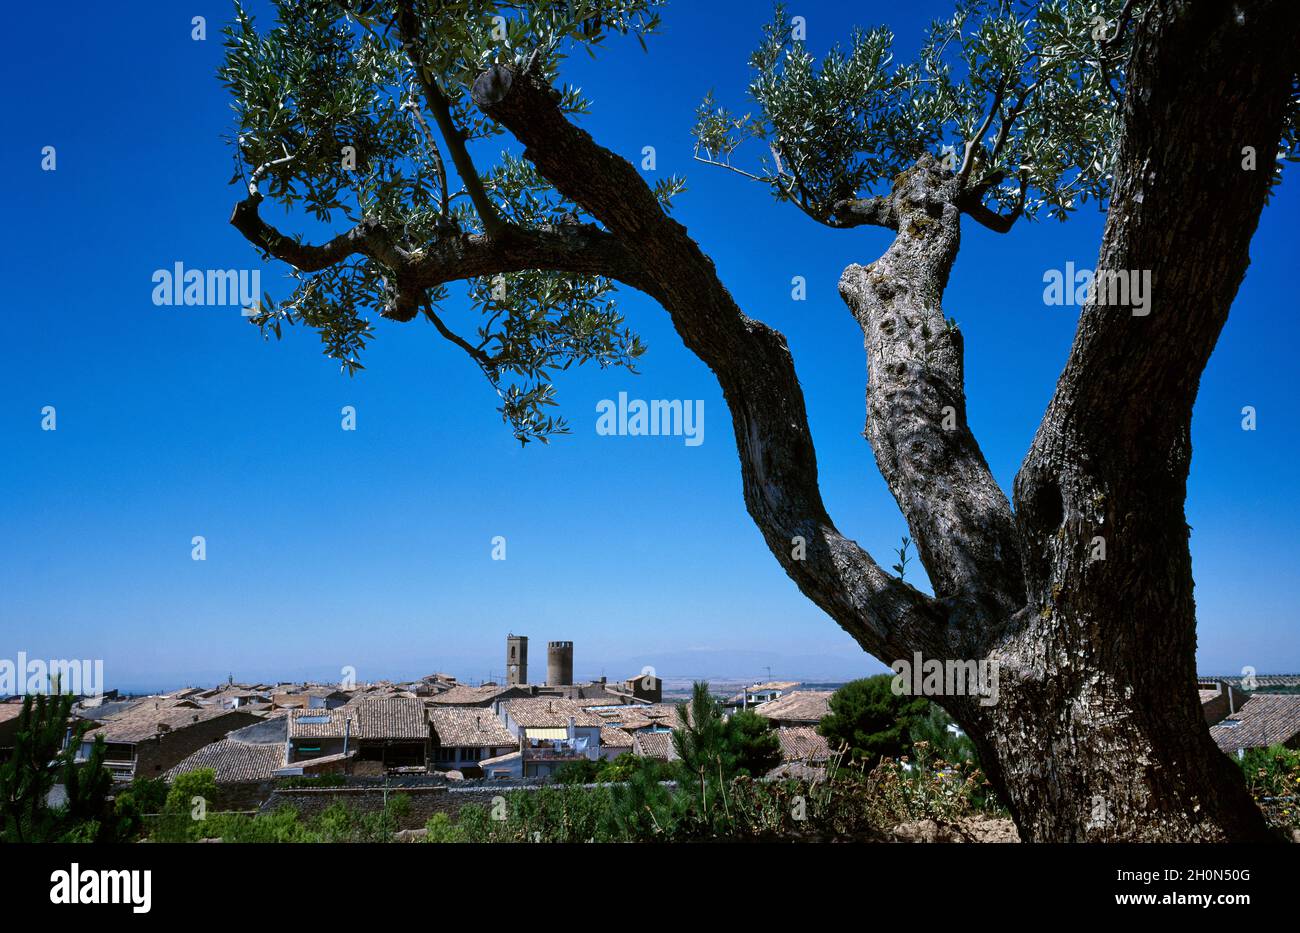 Spain, Catalonia, Urgell region, Lleida province, Verdu. General view of the village. In the foreground an olive tree. Stock Photo